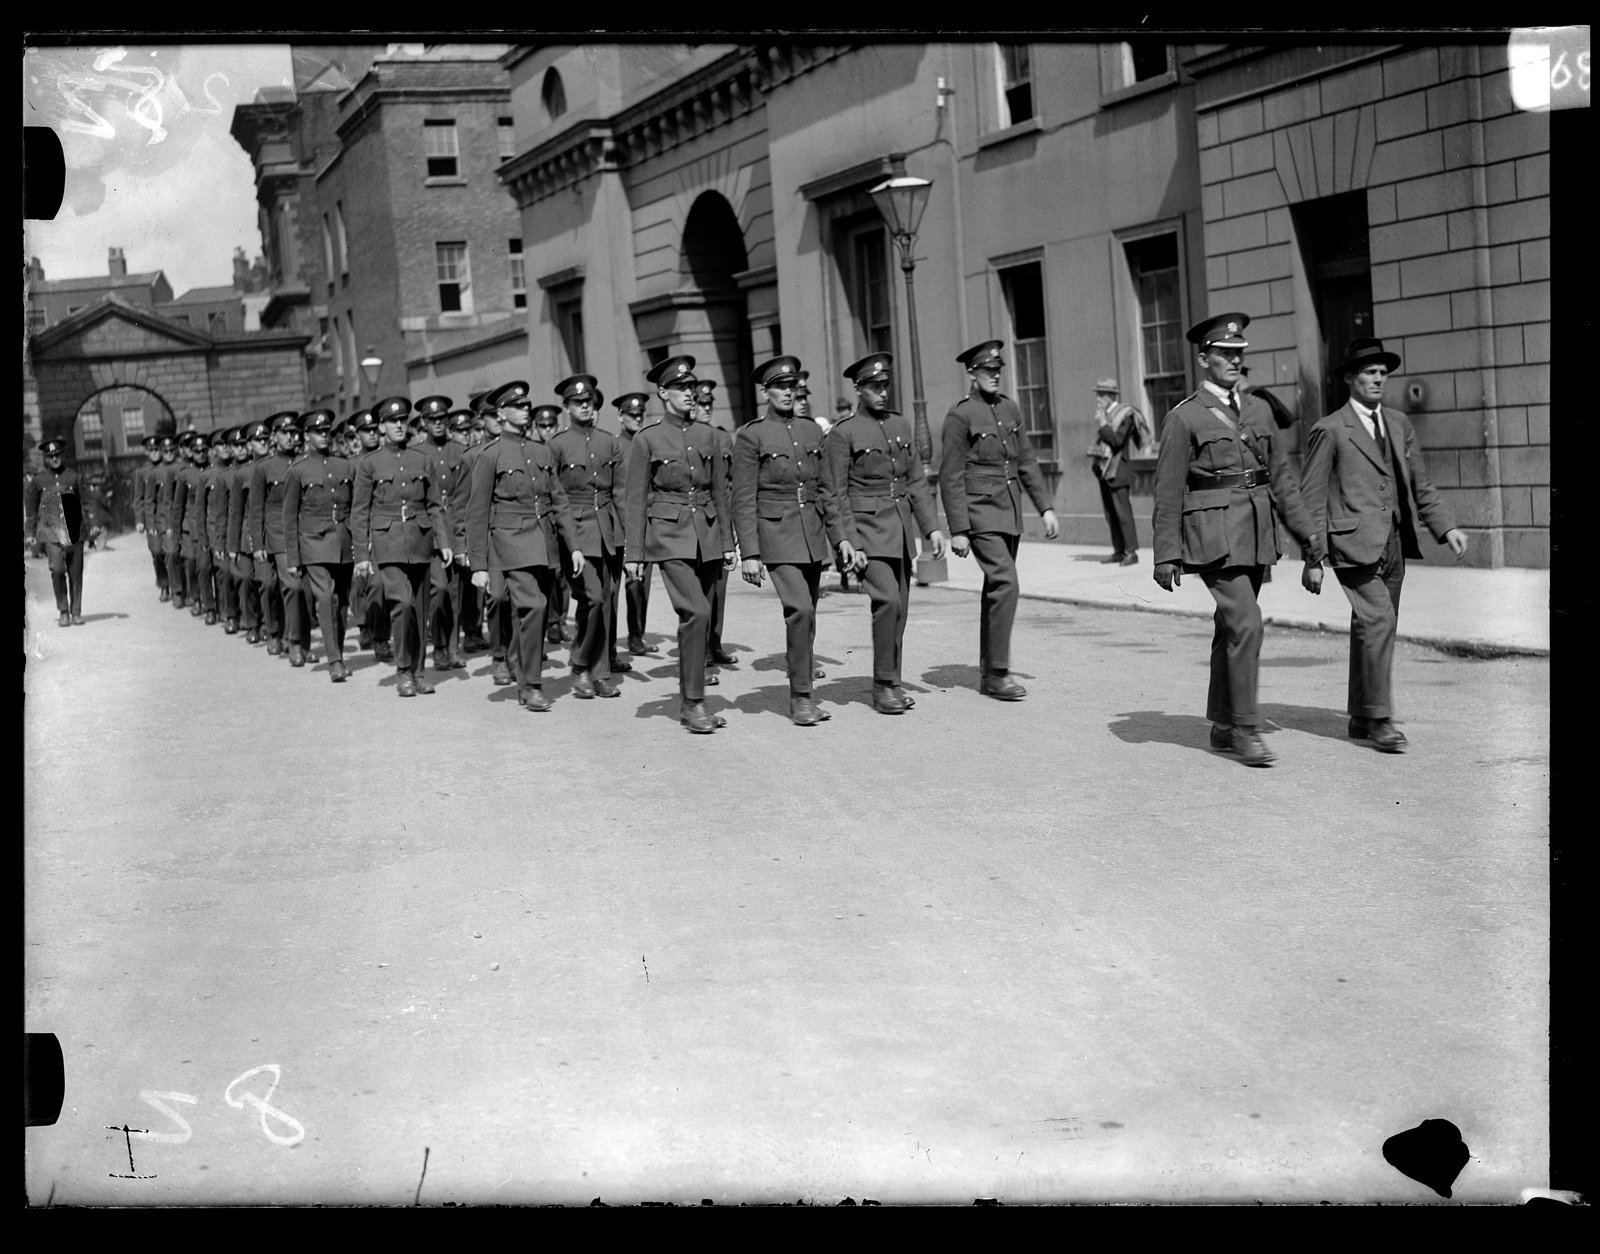 Image - The Civic Guard march into Dublin Castle, led by Commissioner Michael Staines. He is in civilian clothes; this was his last act before resignation. Image: Cashman Collection, RTÉ Archive